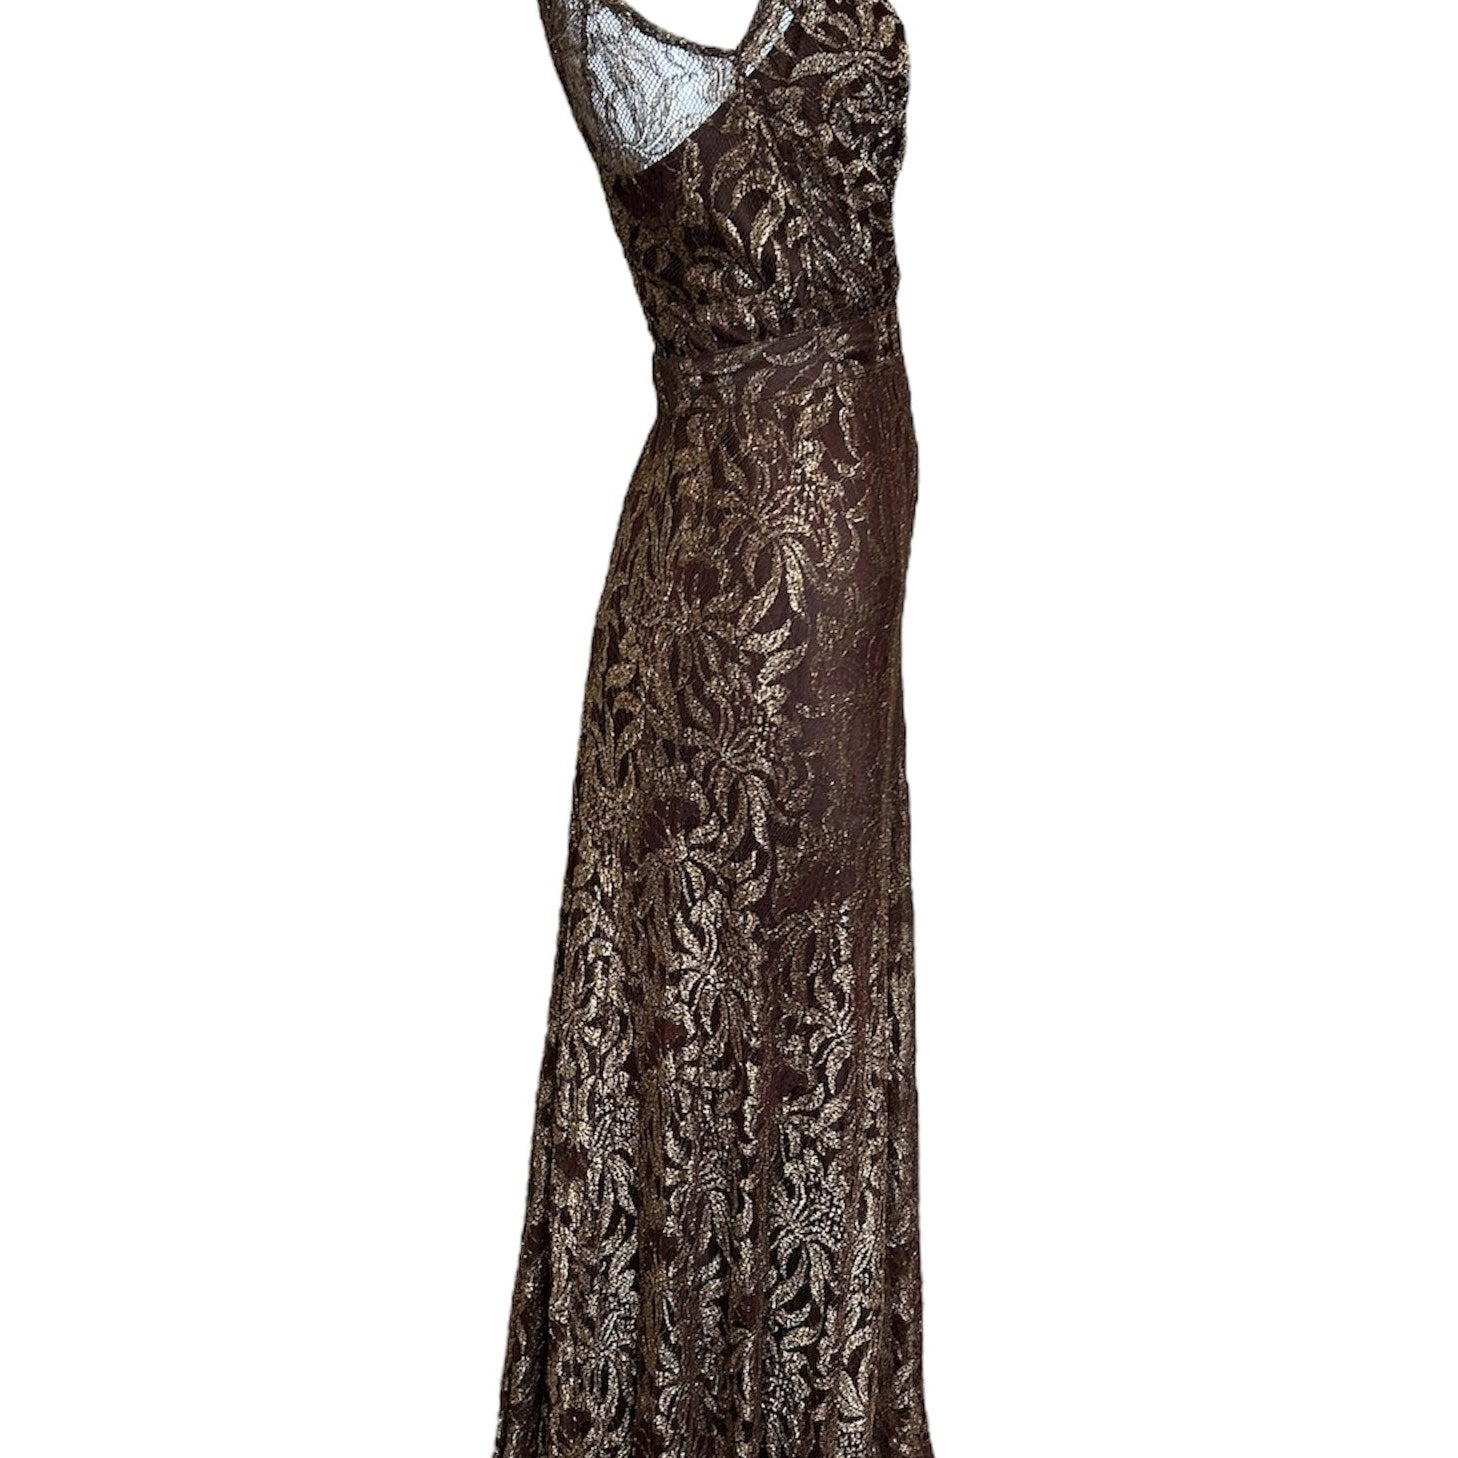 1930s Brown Lace & Gold Lame Gown w/ Belt SIDE PHOTO 2 OF 4